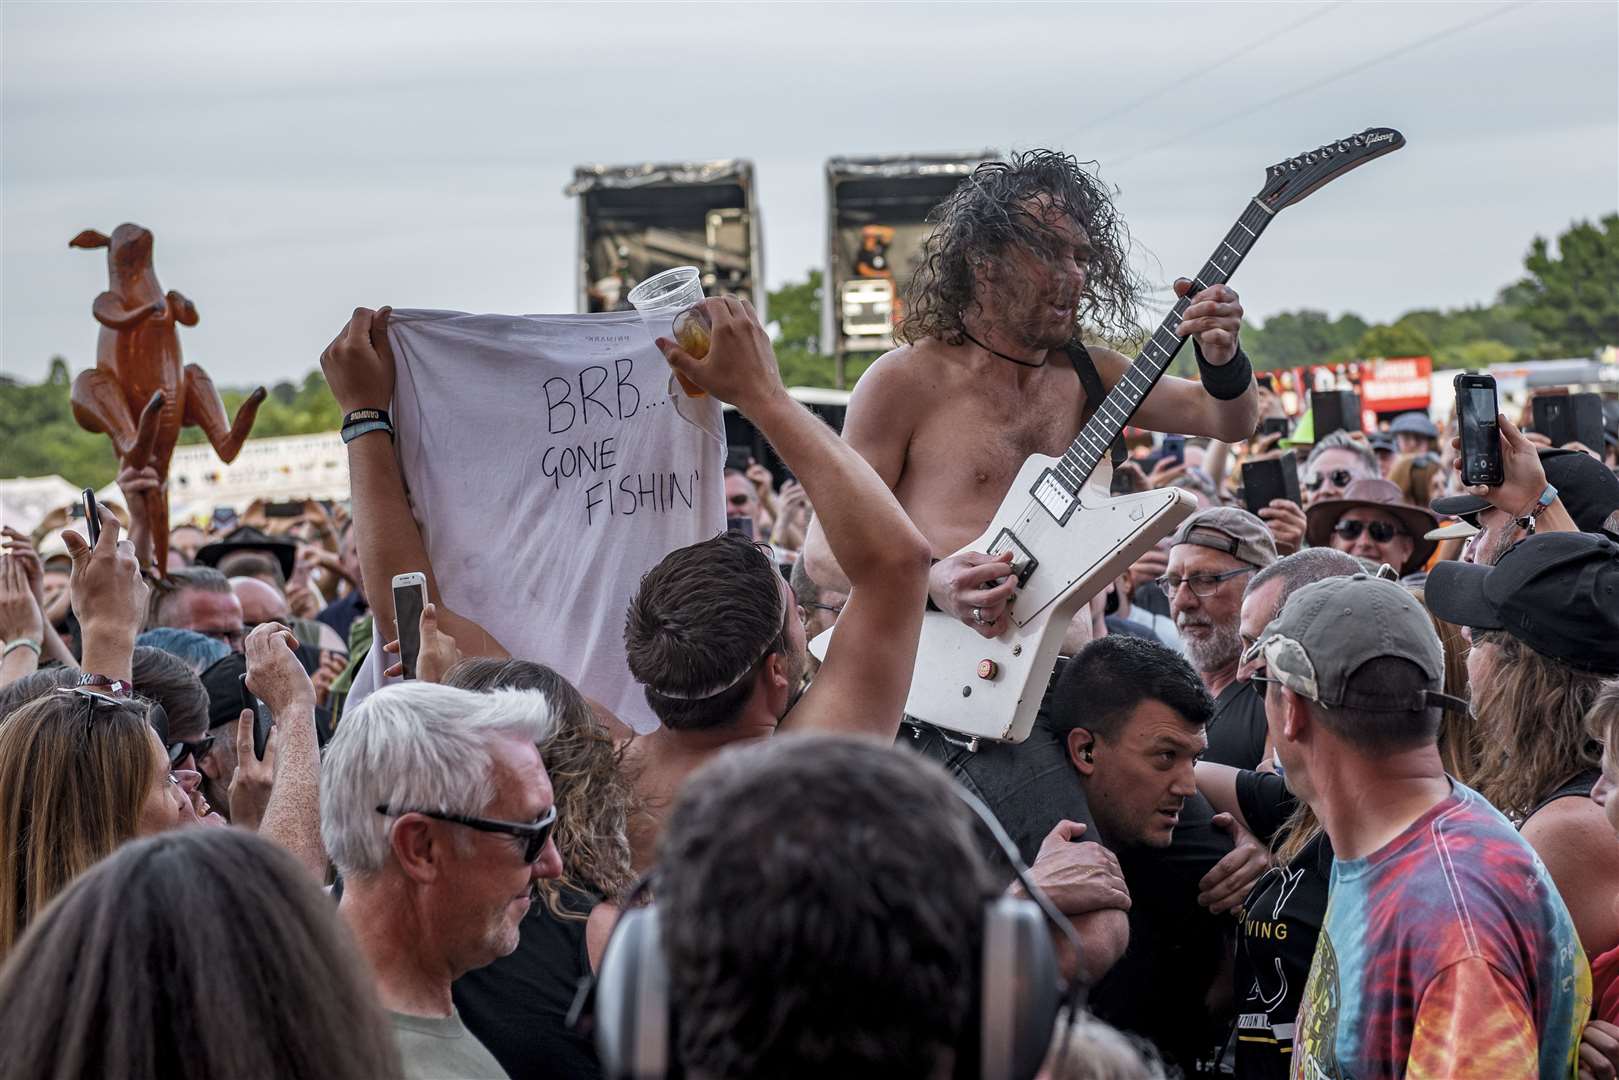 Airbourne frontman Joel heads into the crowd at Ramblin Man Fair in 2019 Picture: Chris White